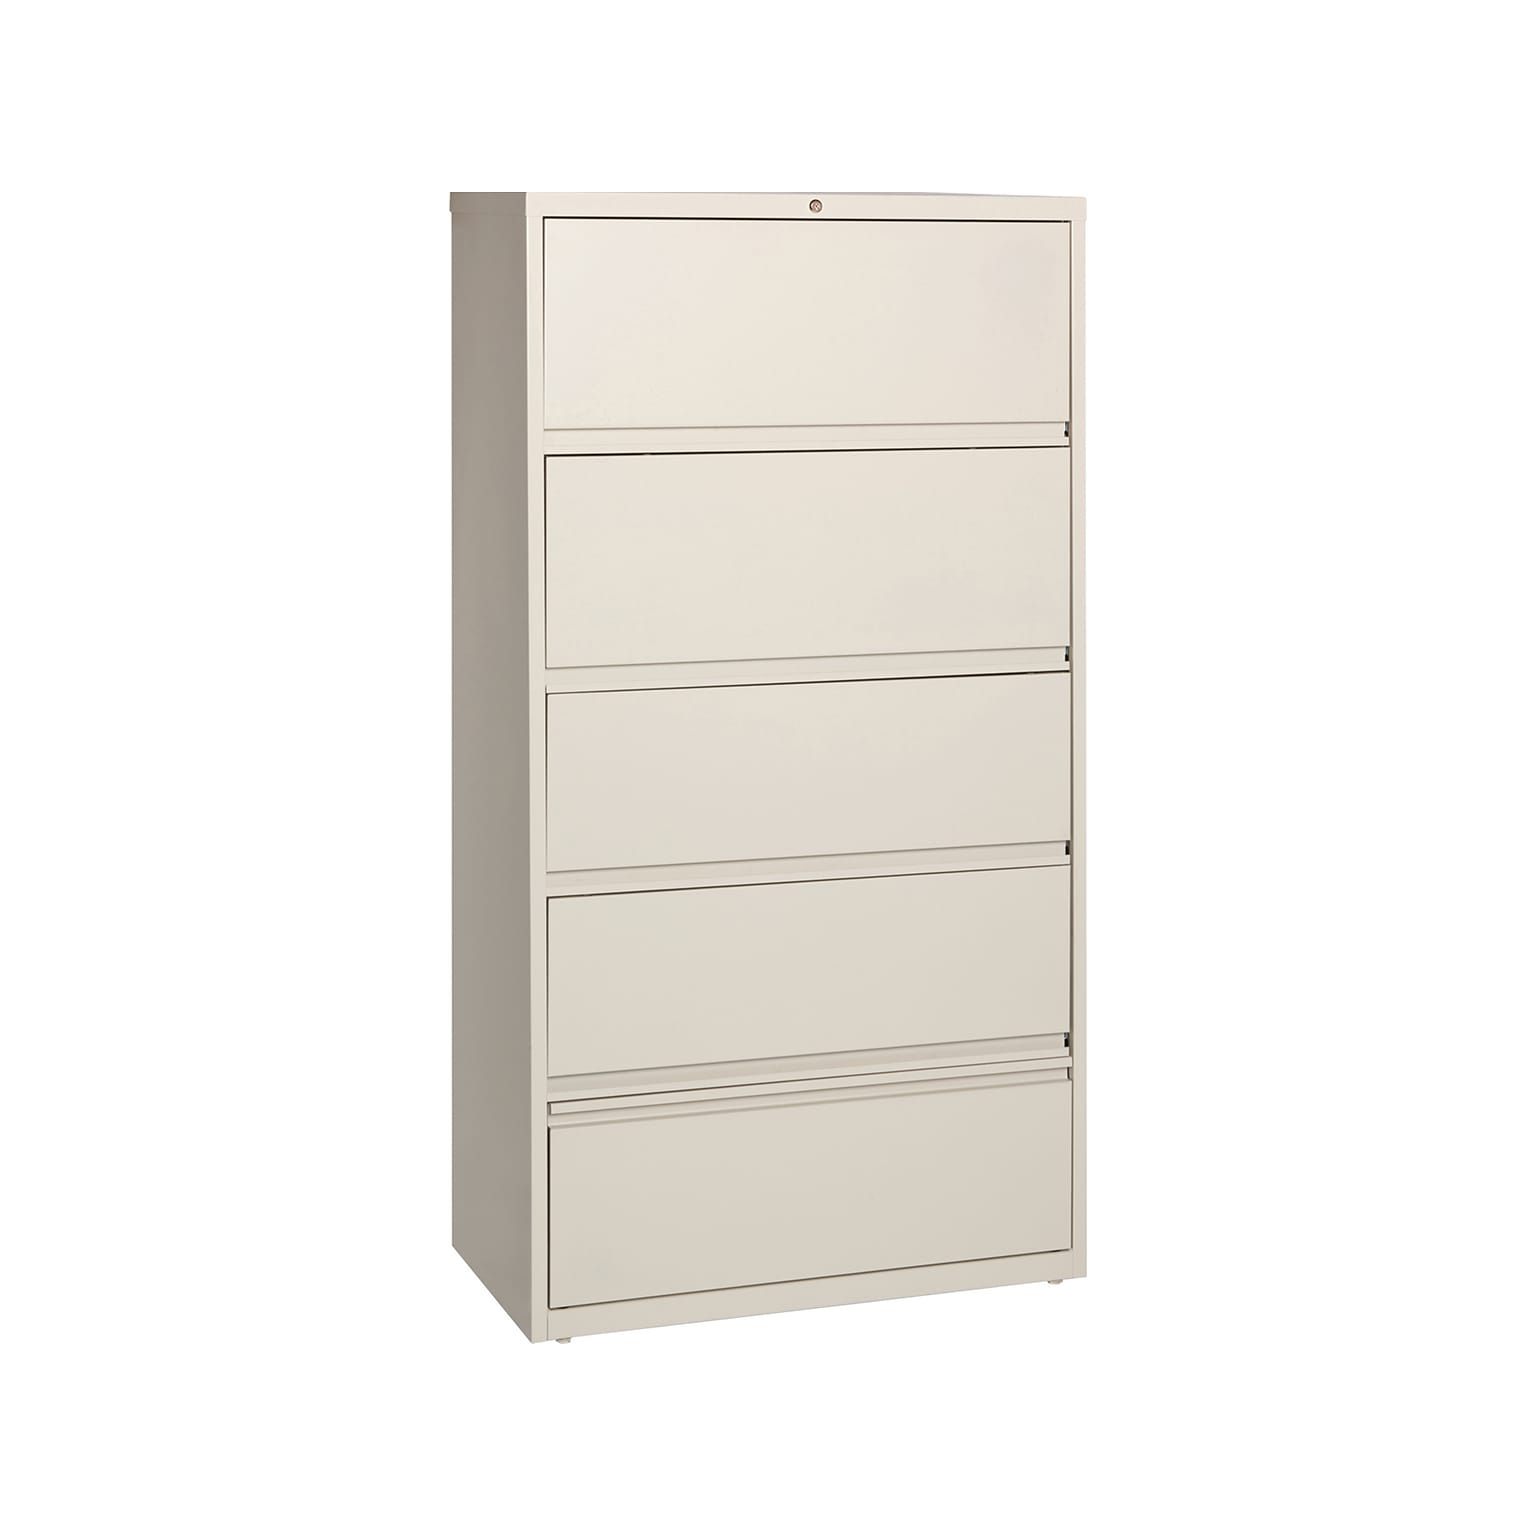 Hirsh HL10000 Series 5-Drawer Lateral File Cabinet, Locking, Letter/Legal, Putty, 36 (17901)